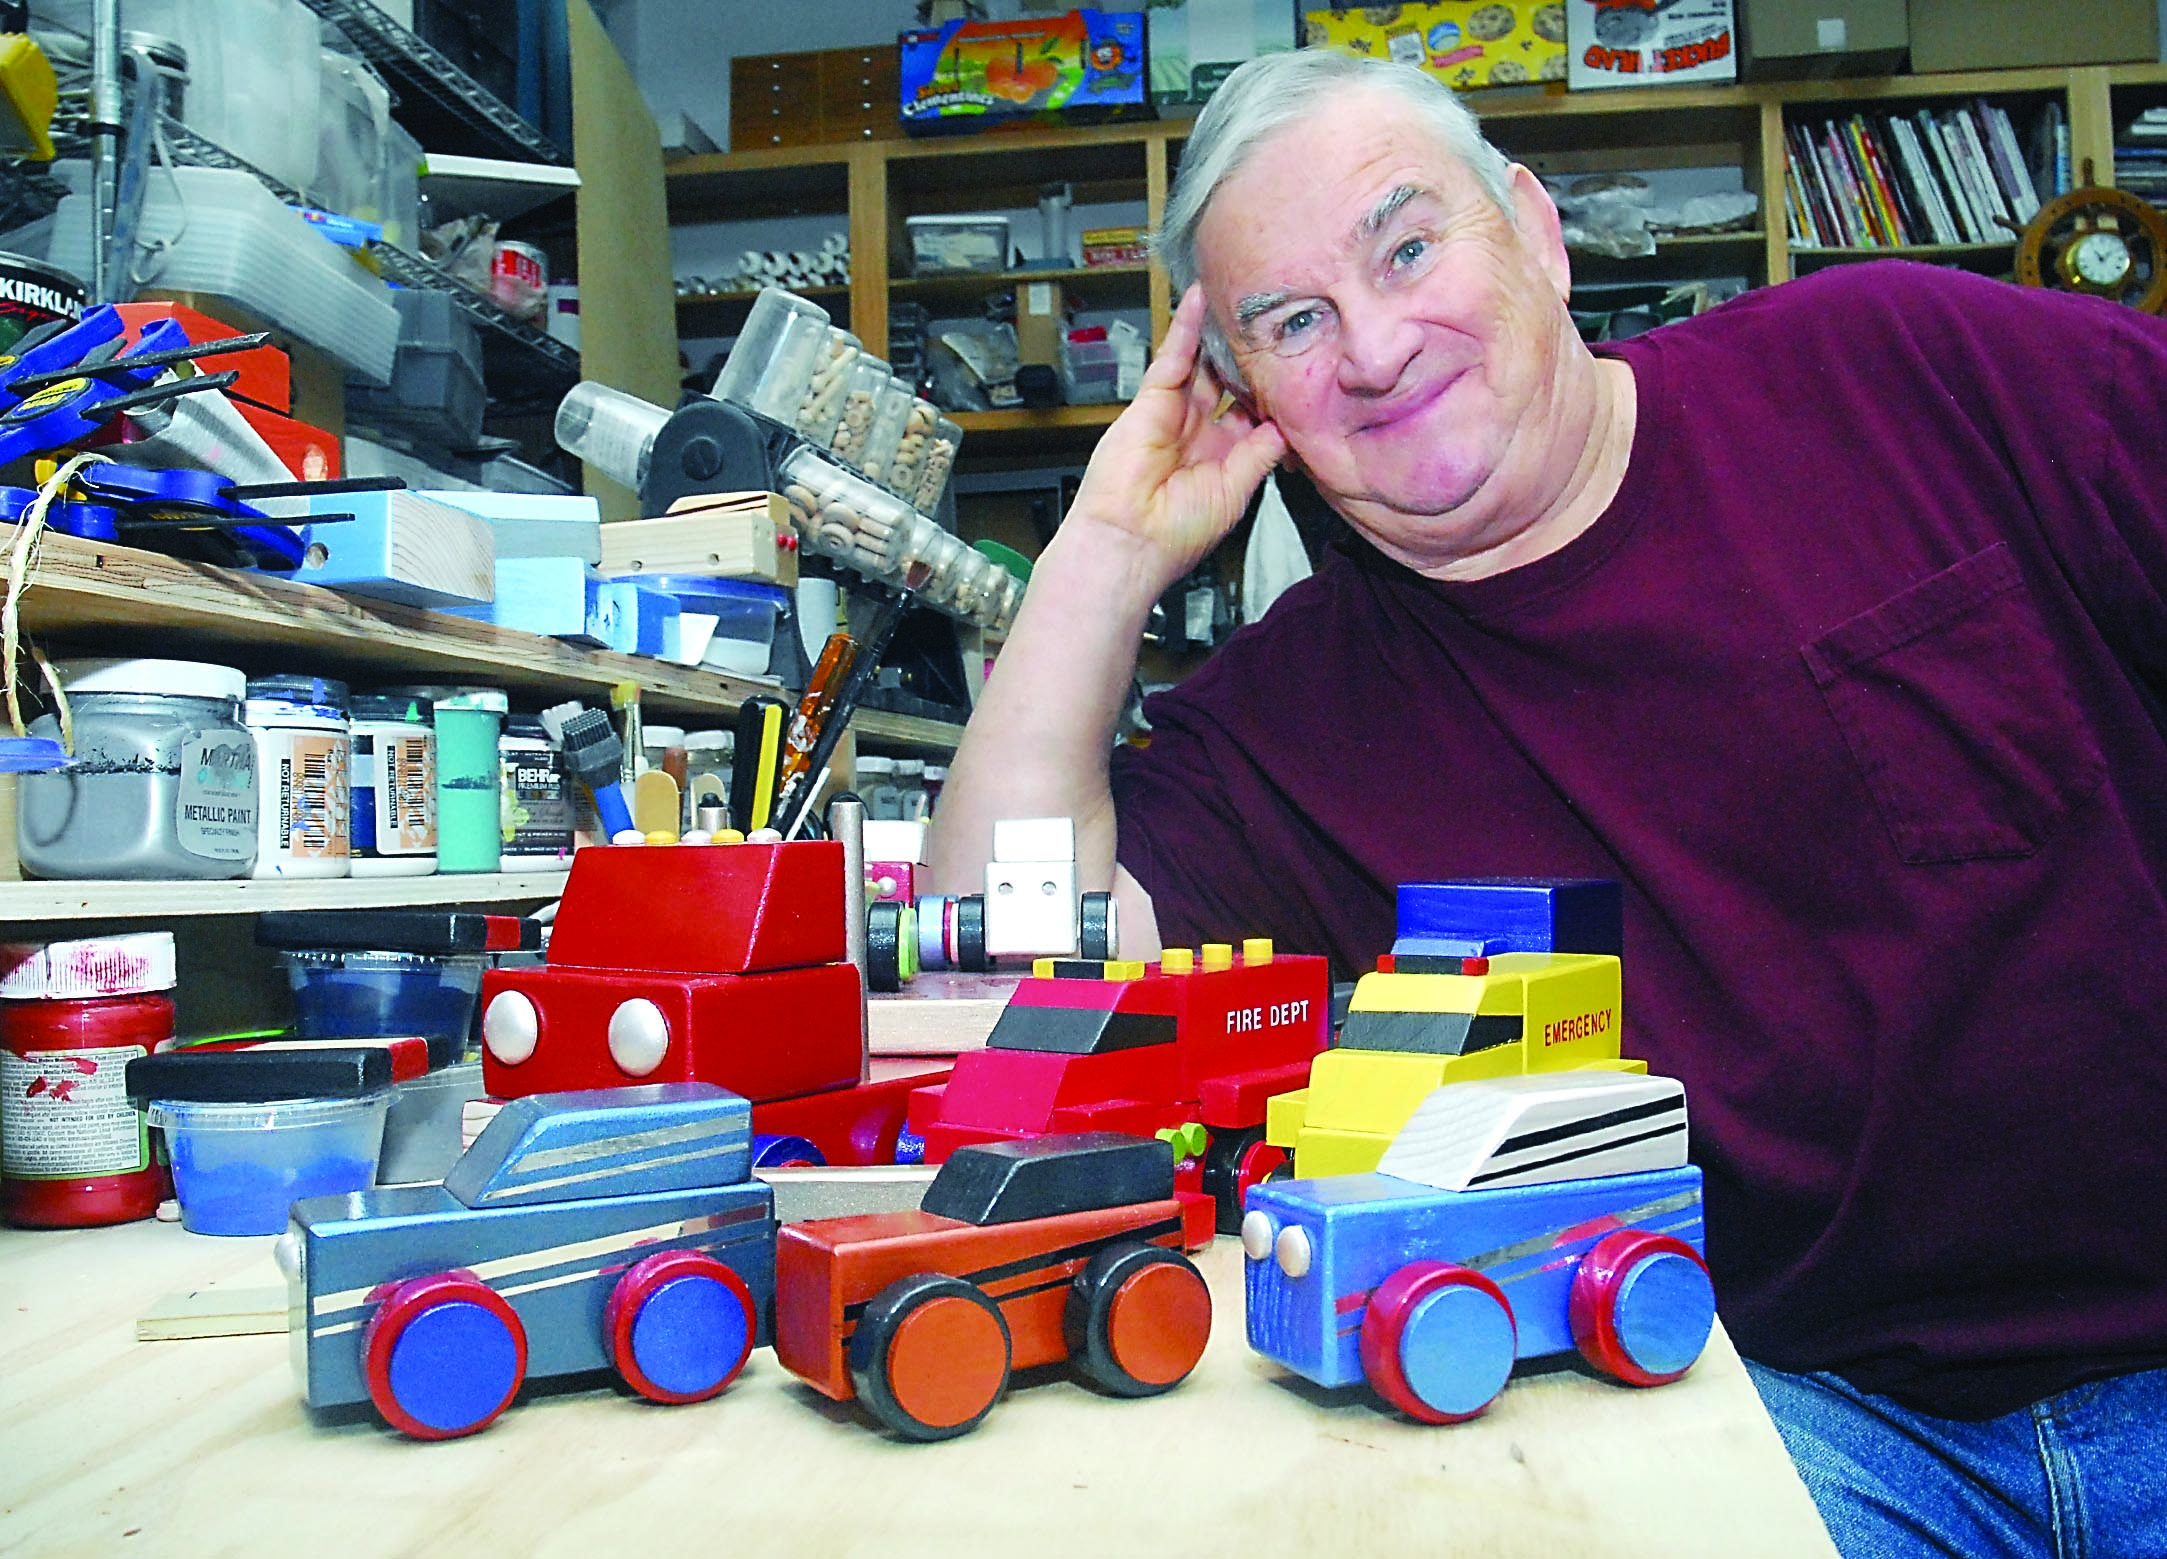 Larry Laing of Sequim is seen with some of the wooden toy cars and trucks he constructs in his home workshop and then donates to needy youngsters